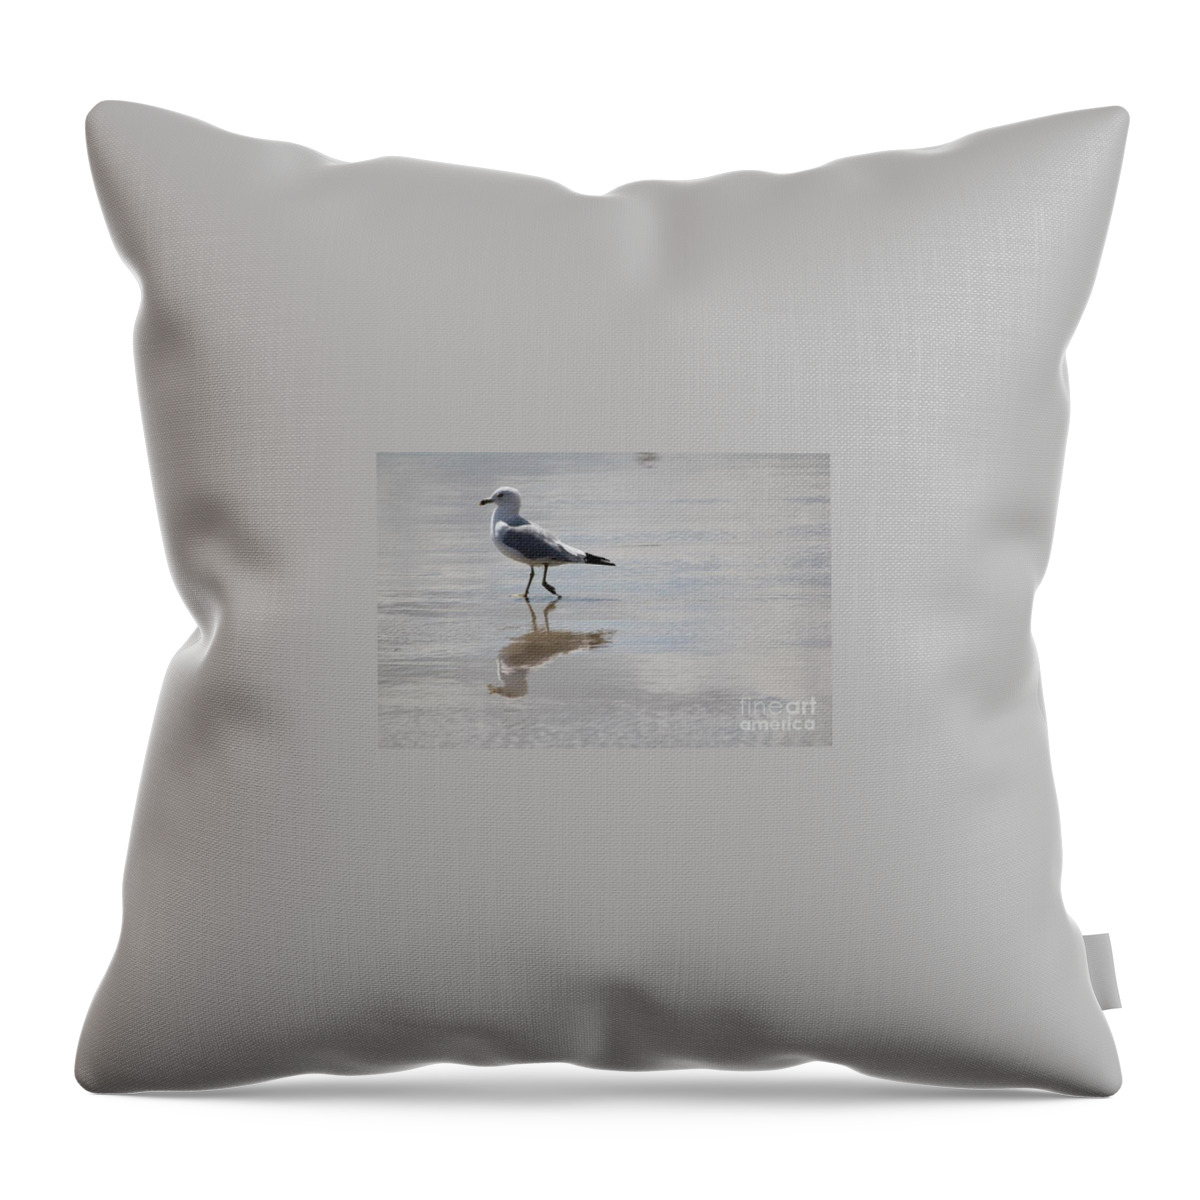 Seagull Throw Pillow featuring the photograph Reflective Seagull by Deena Withycombe